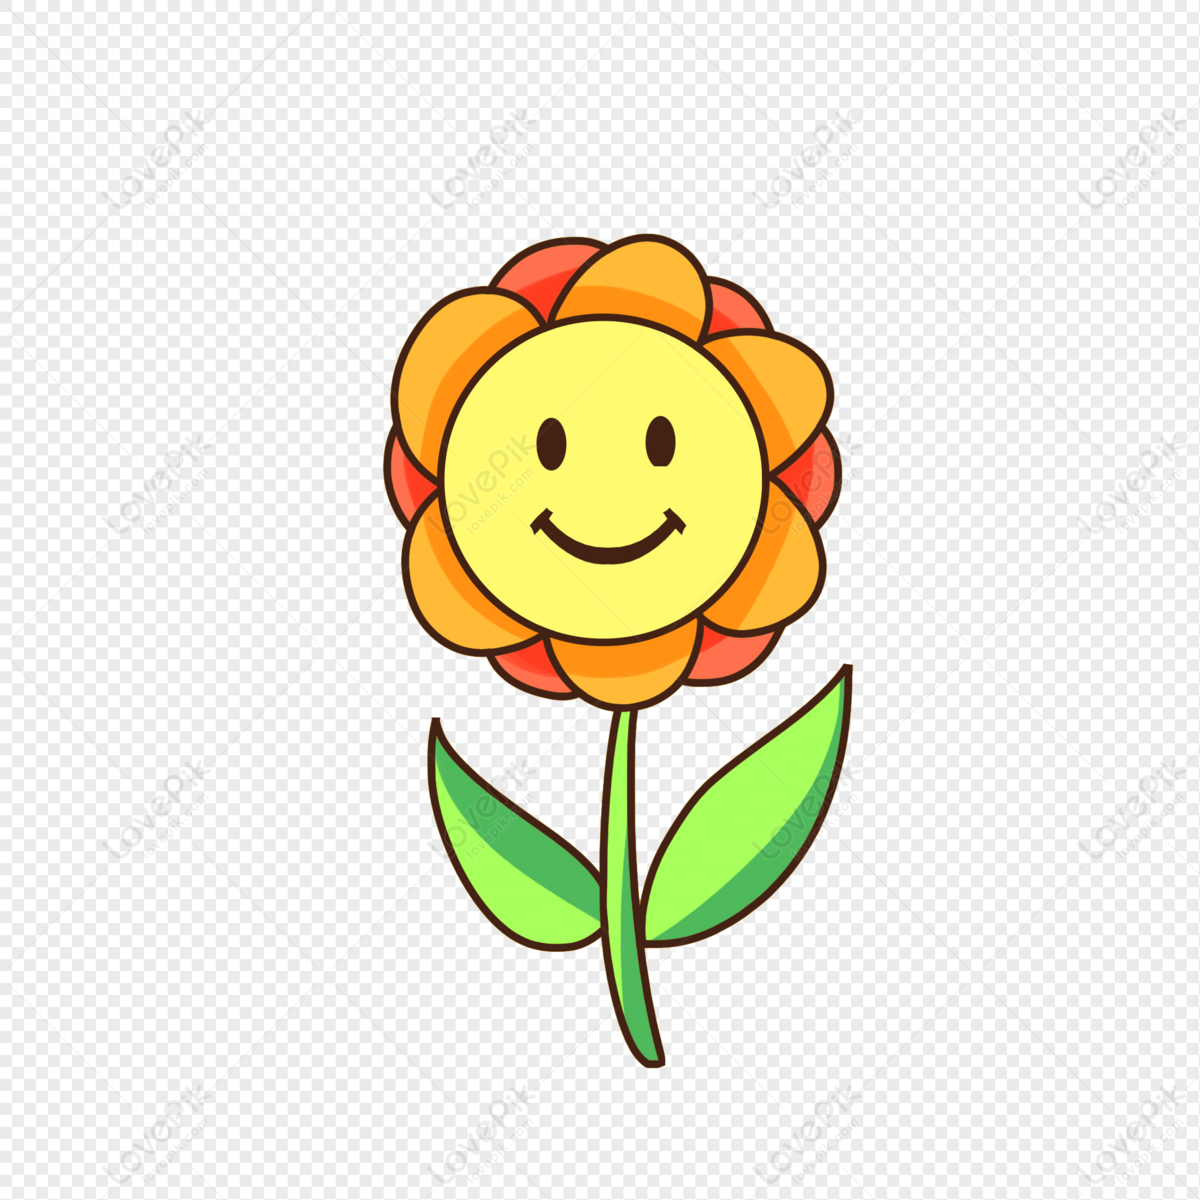 Hand Drawn Cartoon World Smiling Day Smiling Sun Flower PNG Hd Transparent  Image And Clipart Image For Free Download - Lovepik | 401220384